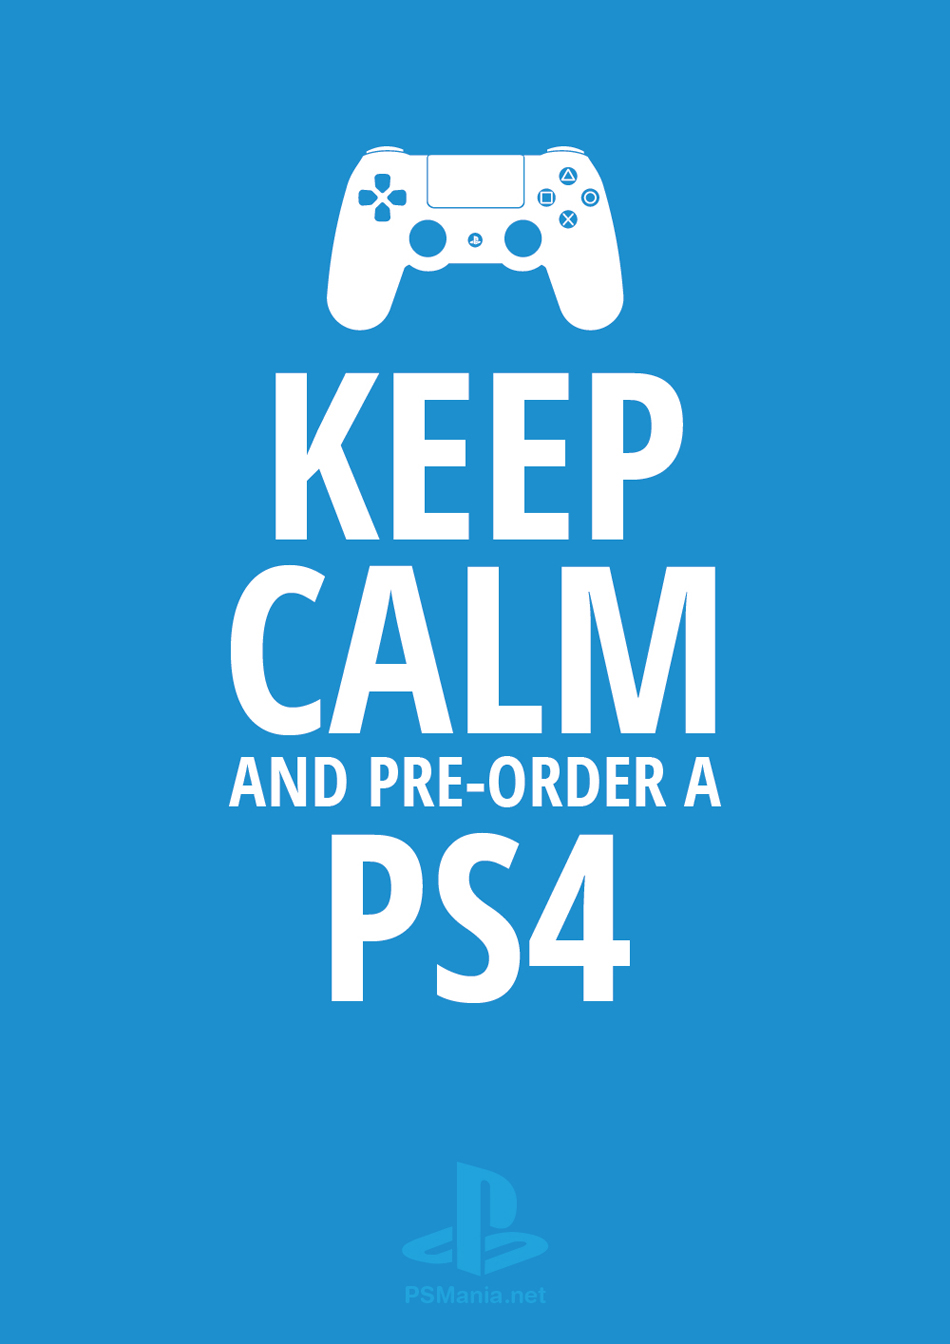 Keep calm and pre-order a PS4